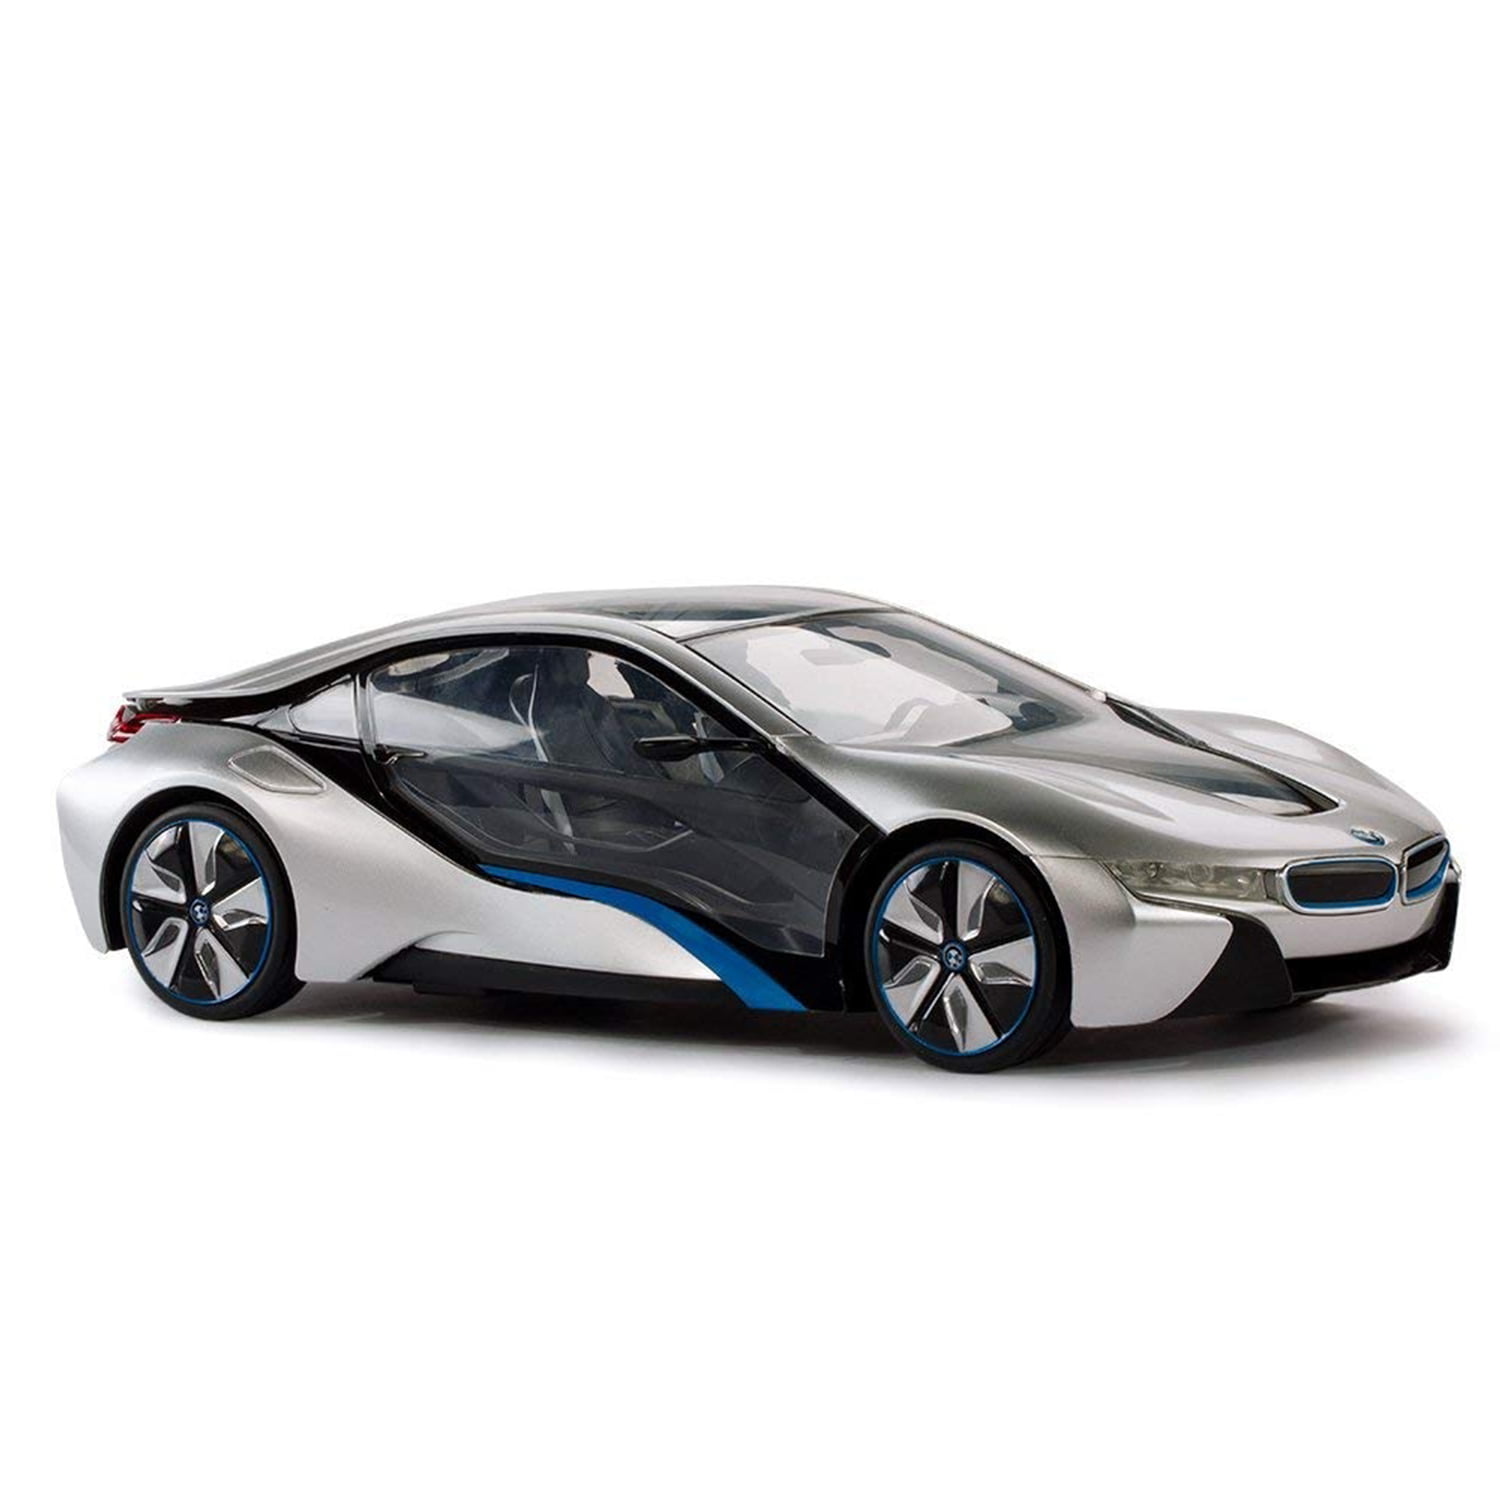 LARGE BMW i8 VISION CONCEPT RECHARGEABLE RADIO REMOTE CONTROL CAR   WHITE  L@@K 